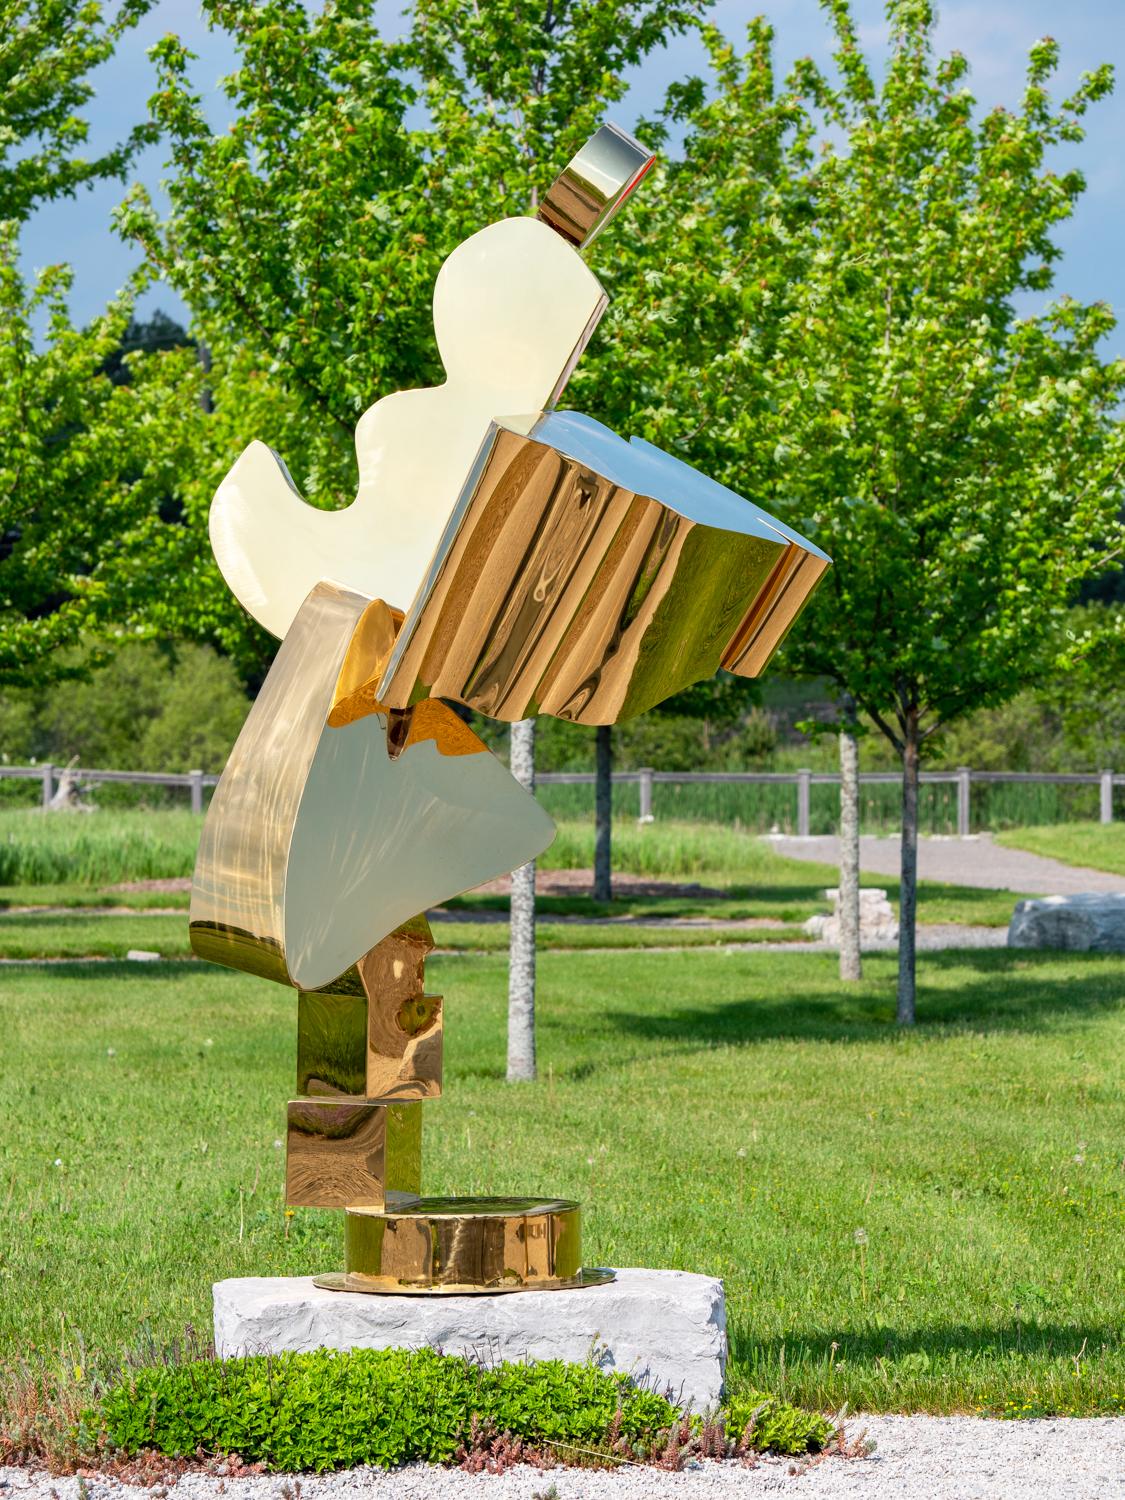 Viktor Mitic Abstract Sculpture - Celestial - tall, post-pop, abstract, gold plated steel, outdoor sculpture